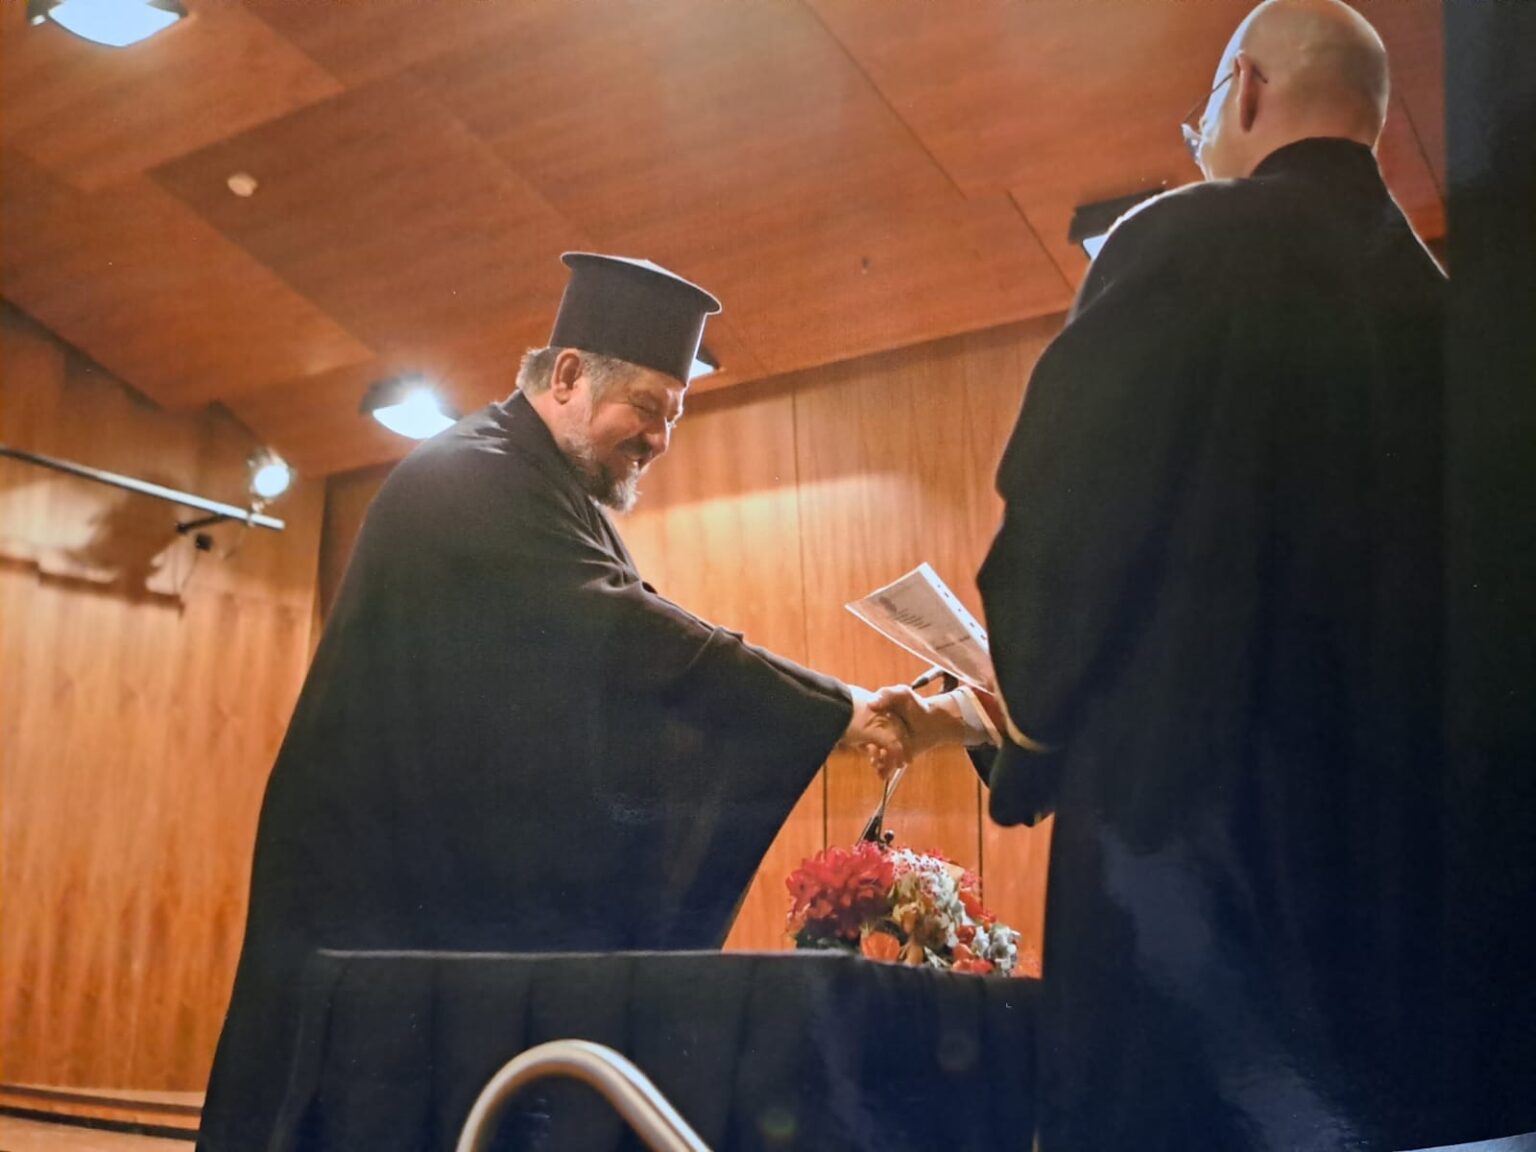 Metropolitan of Zambia was honoured with a Master’s degree from Ionian University, Greece